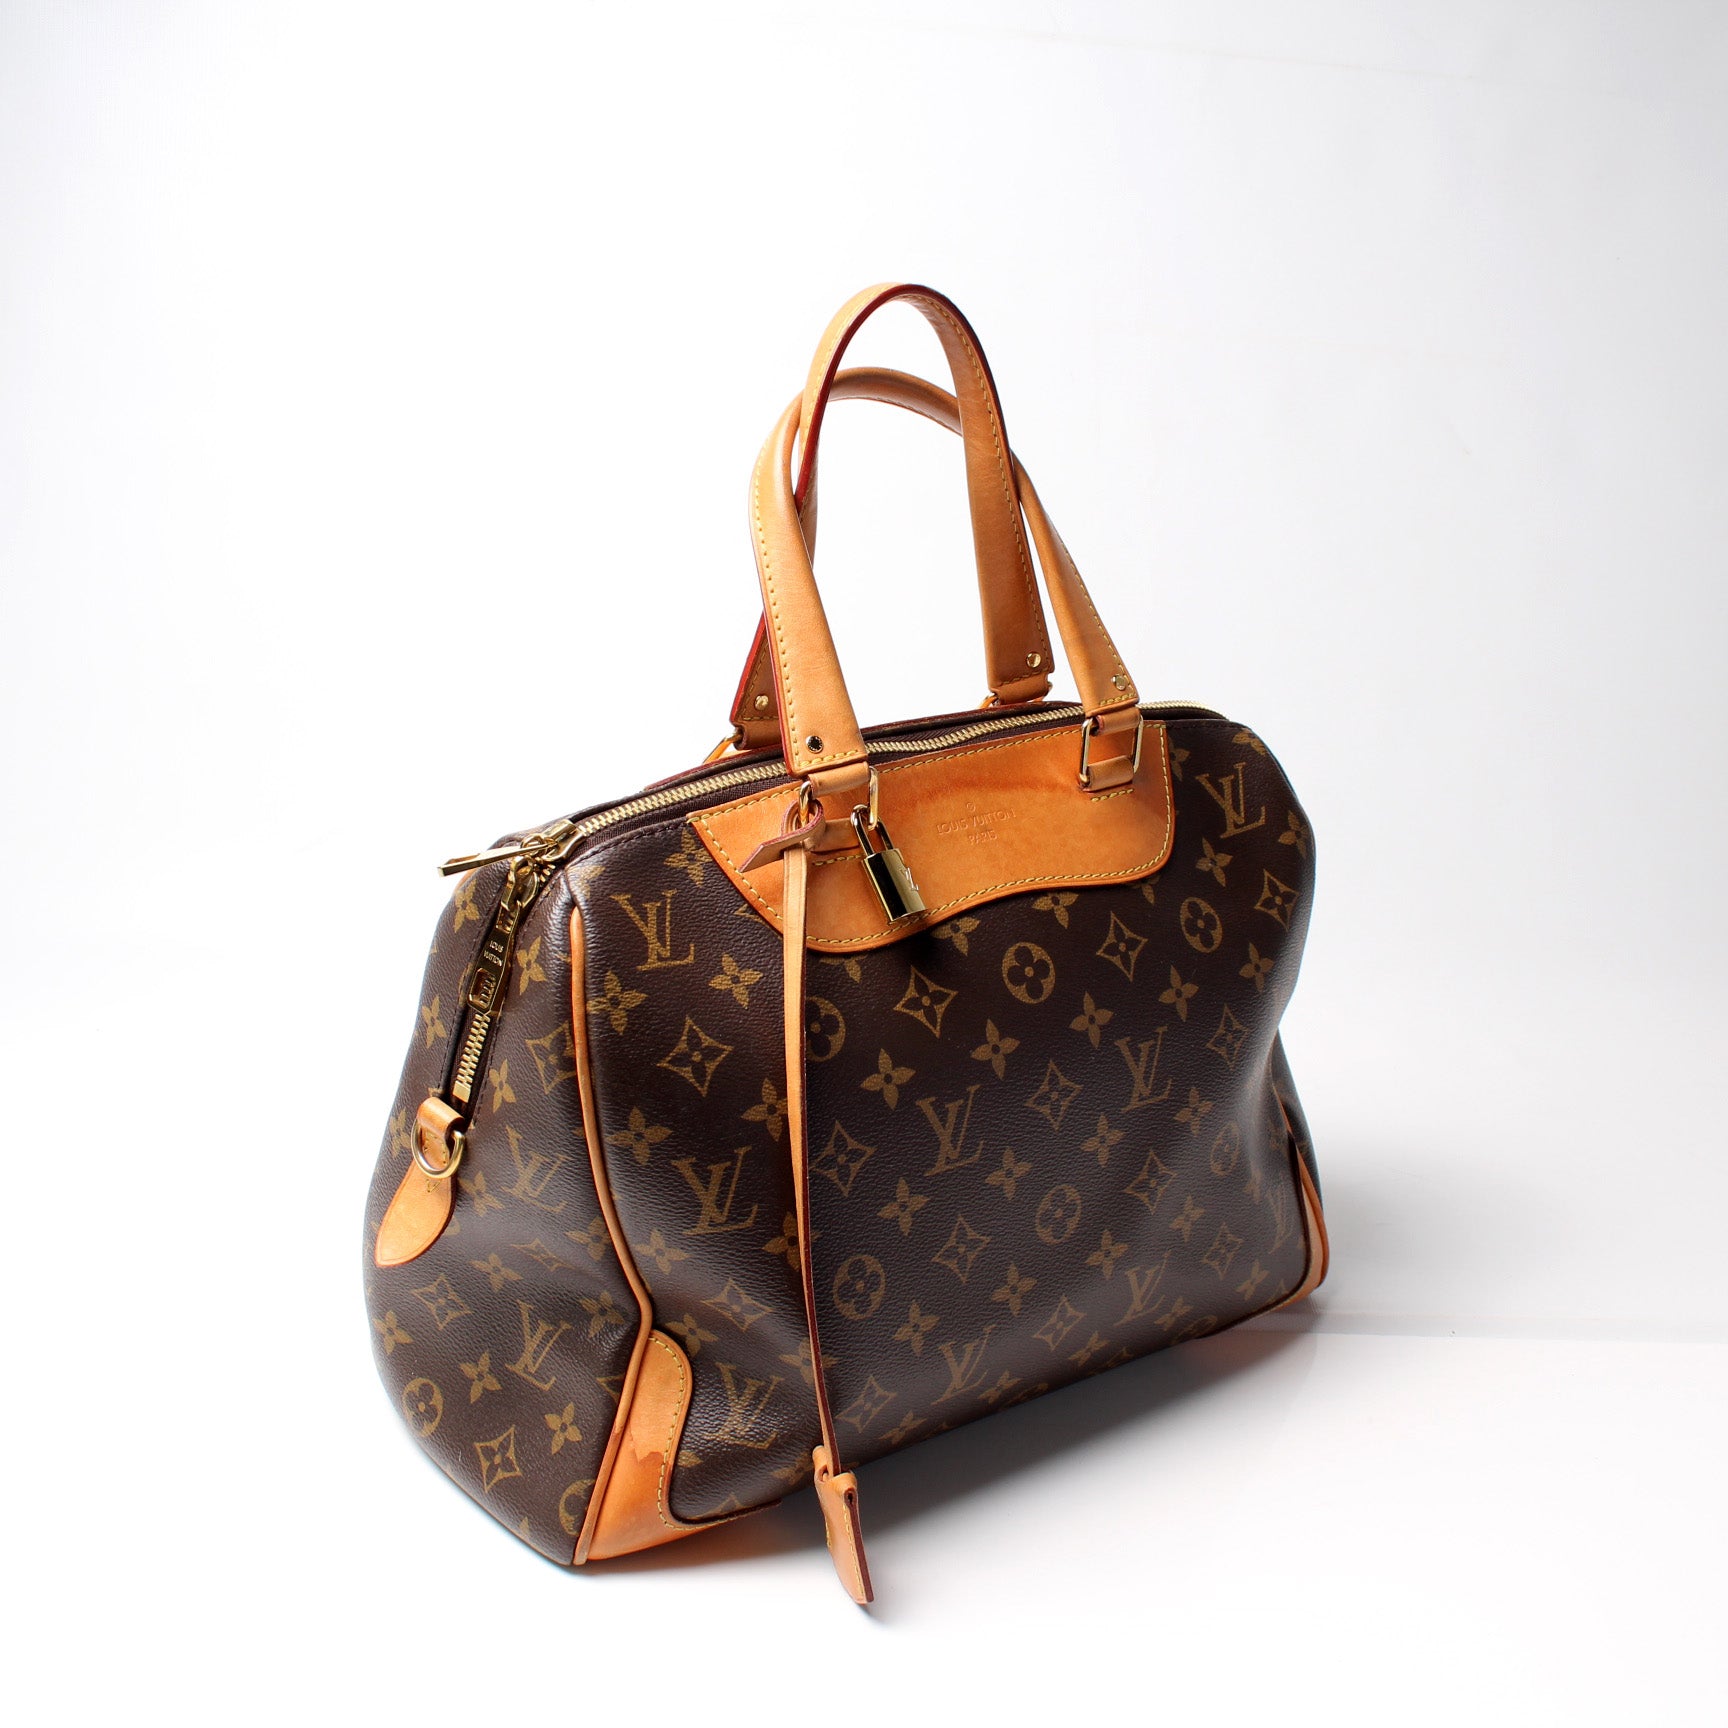 Products By Louis Vuitton: Greenwich Nm